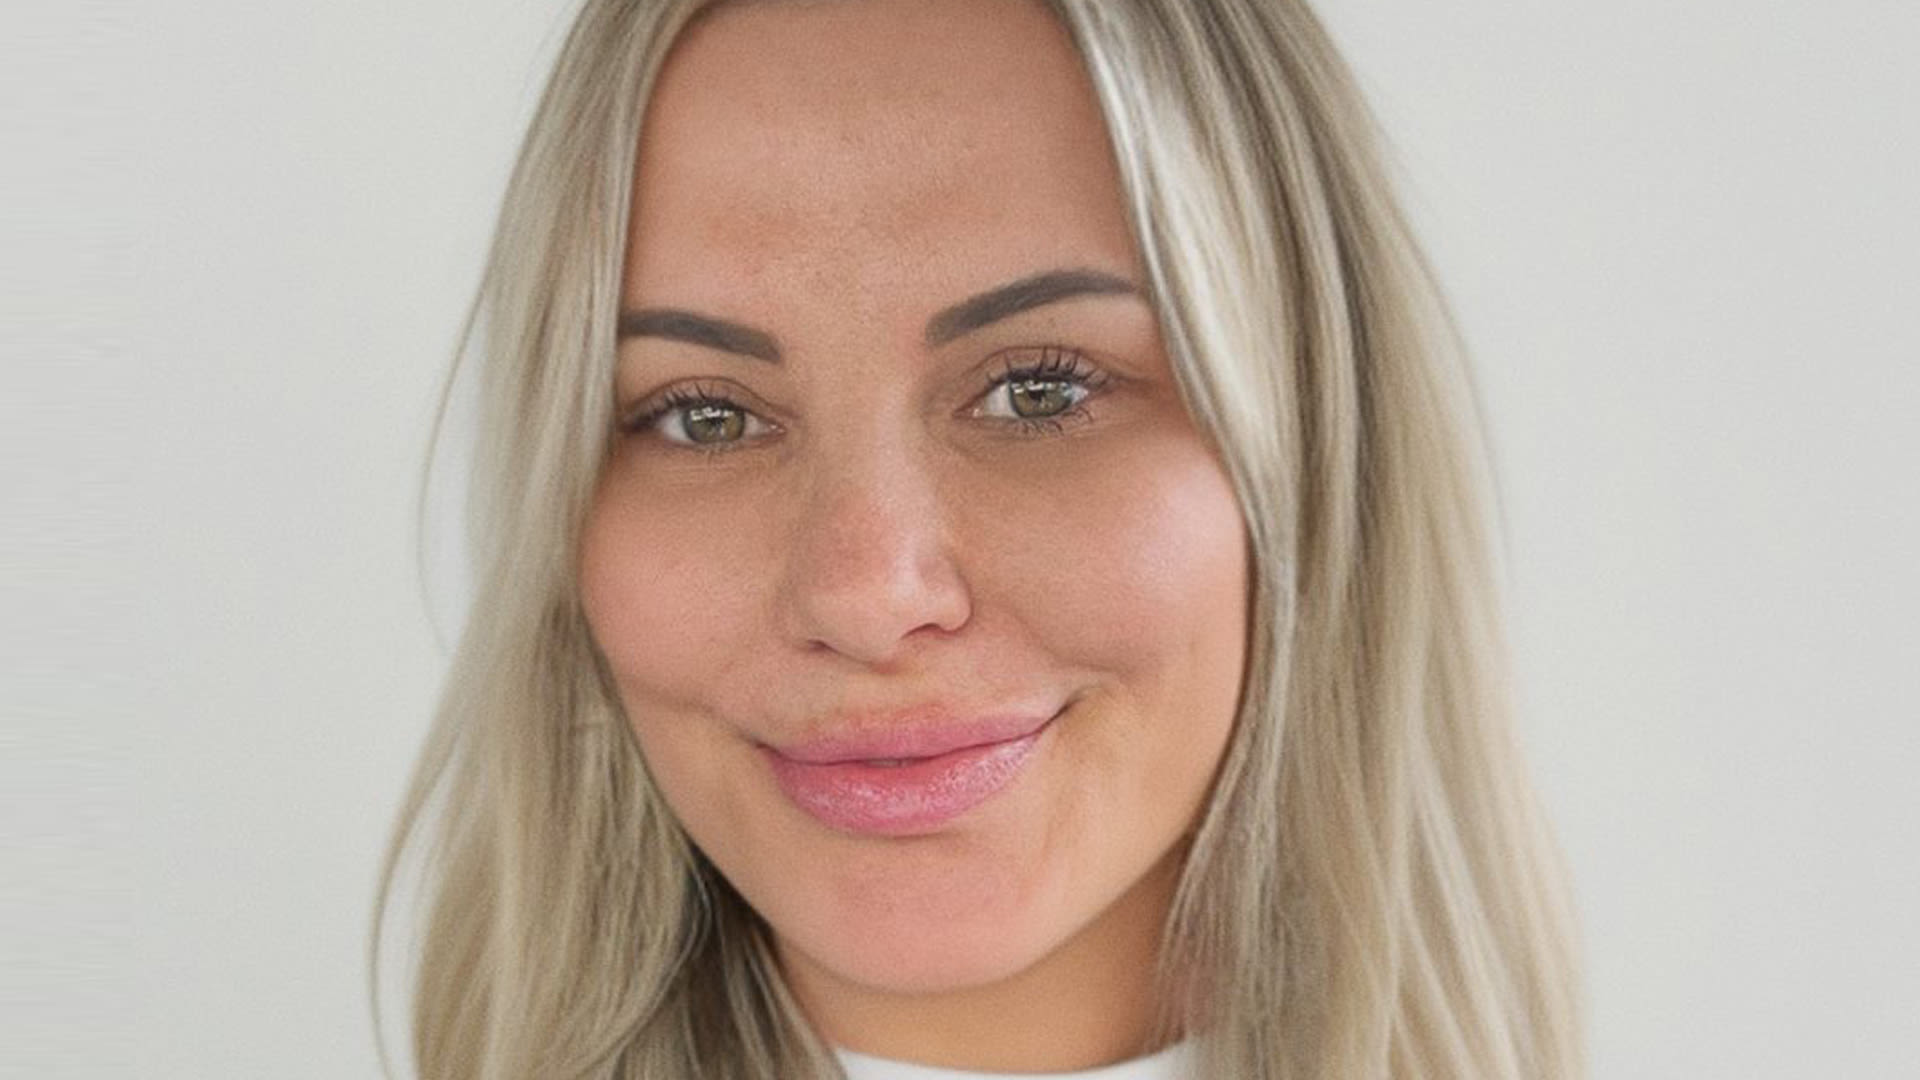 I’m a celeb esthetician - my go-to buys are best to make eyebrows thicker